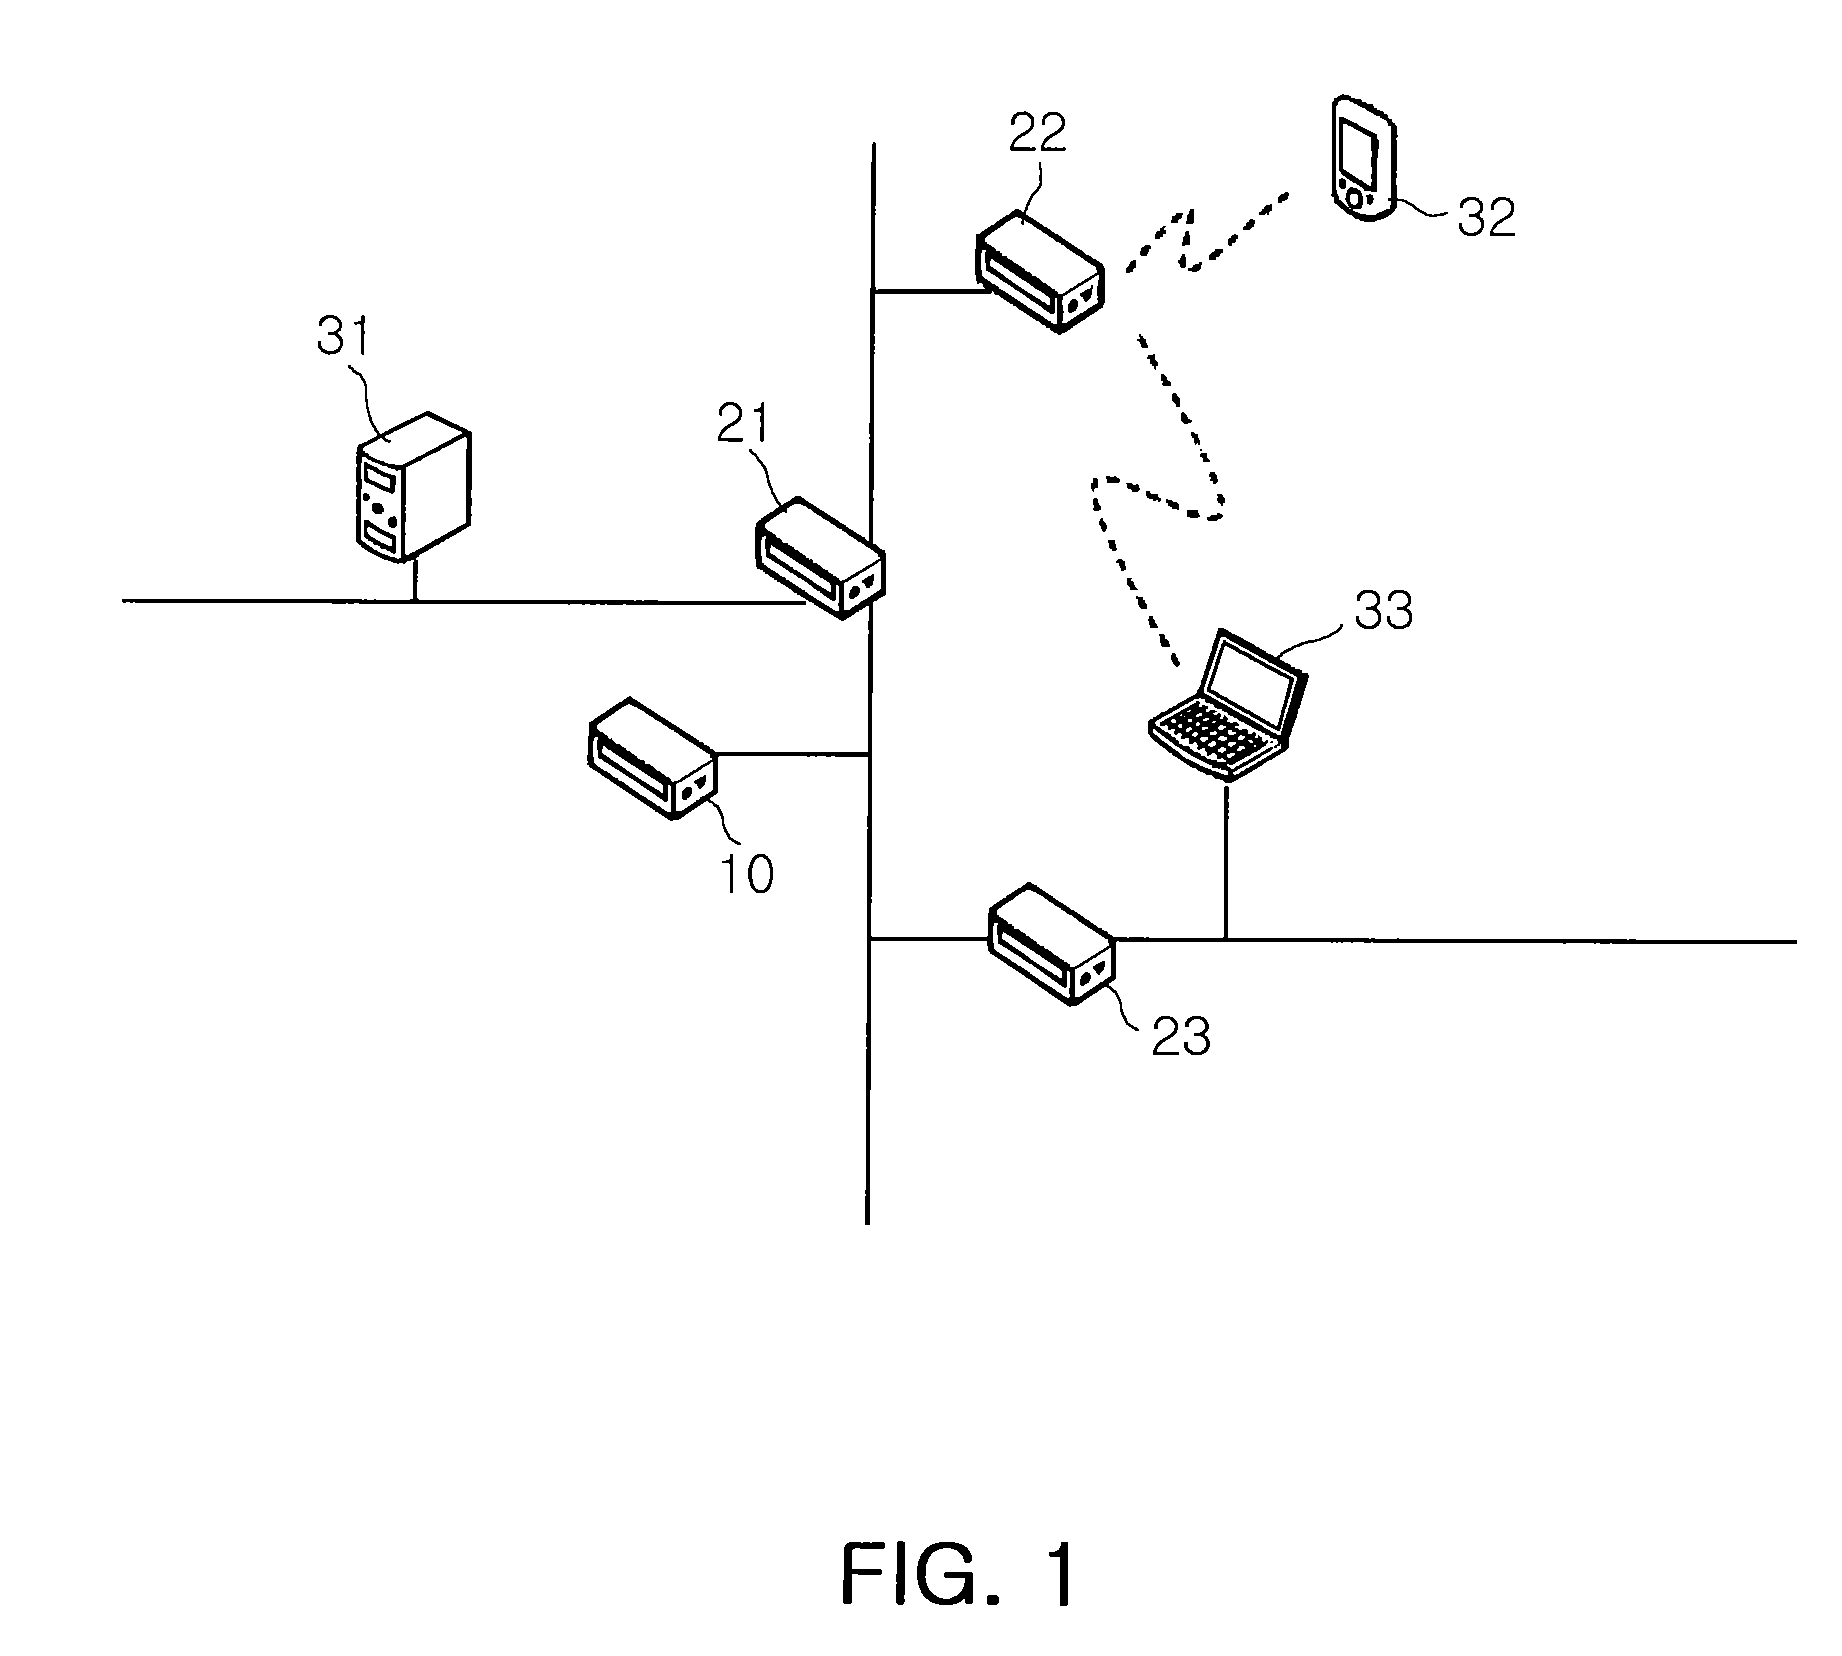 UPnP QoS NETWORK SYSTEM AND METHOD FOR RESERVING PATH AND RESOURCE